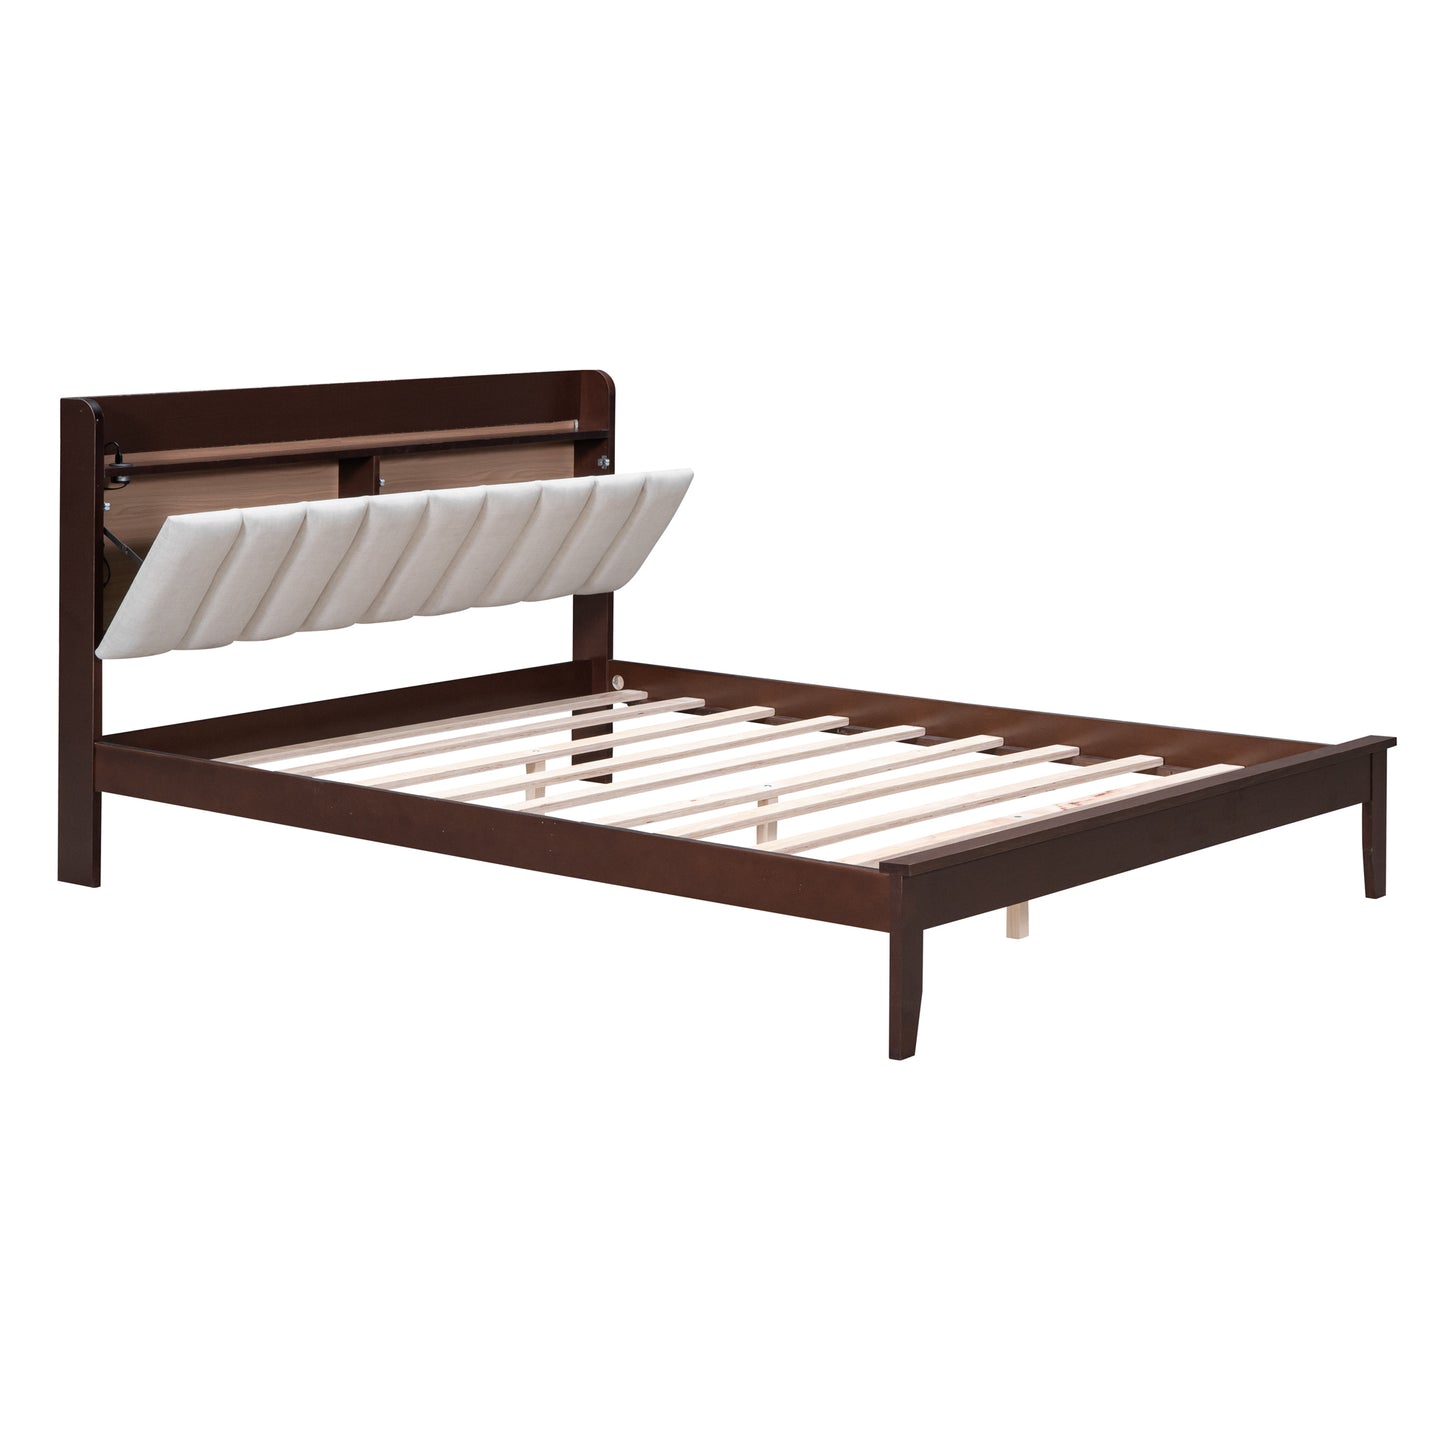 Queen size Platform Bed with USB Charging Station and Storage Upholstered Headboard,LED Bed Frame,No Box Spring Needed,Walnut+Beige